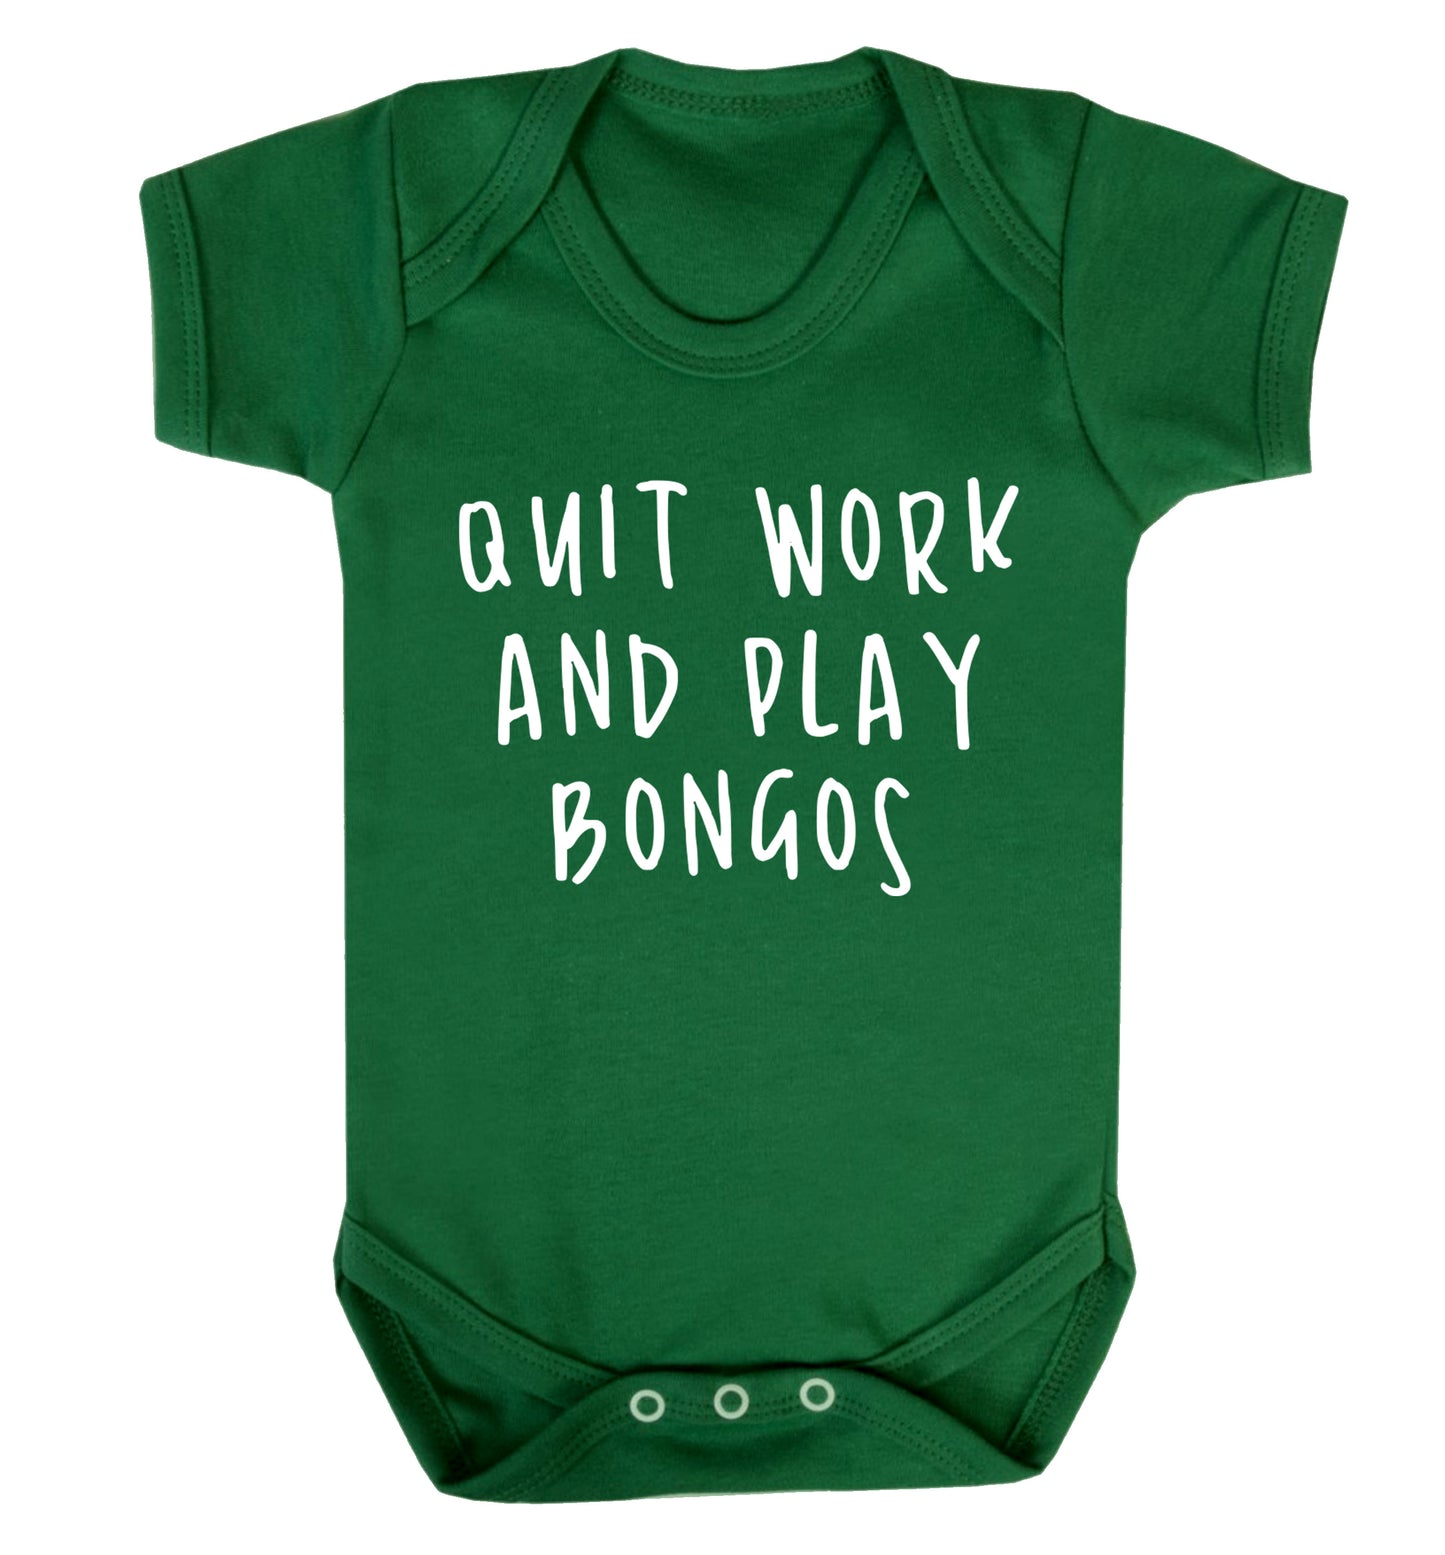 Quit work and play bongos Baby Vest green 18-24 months